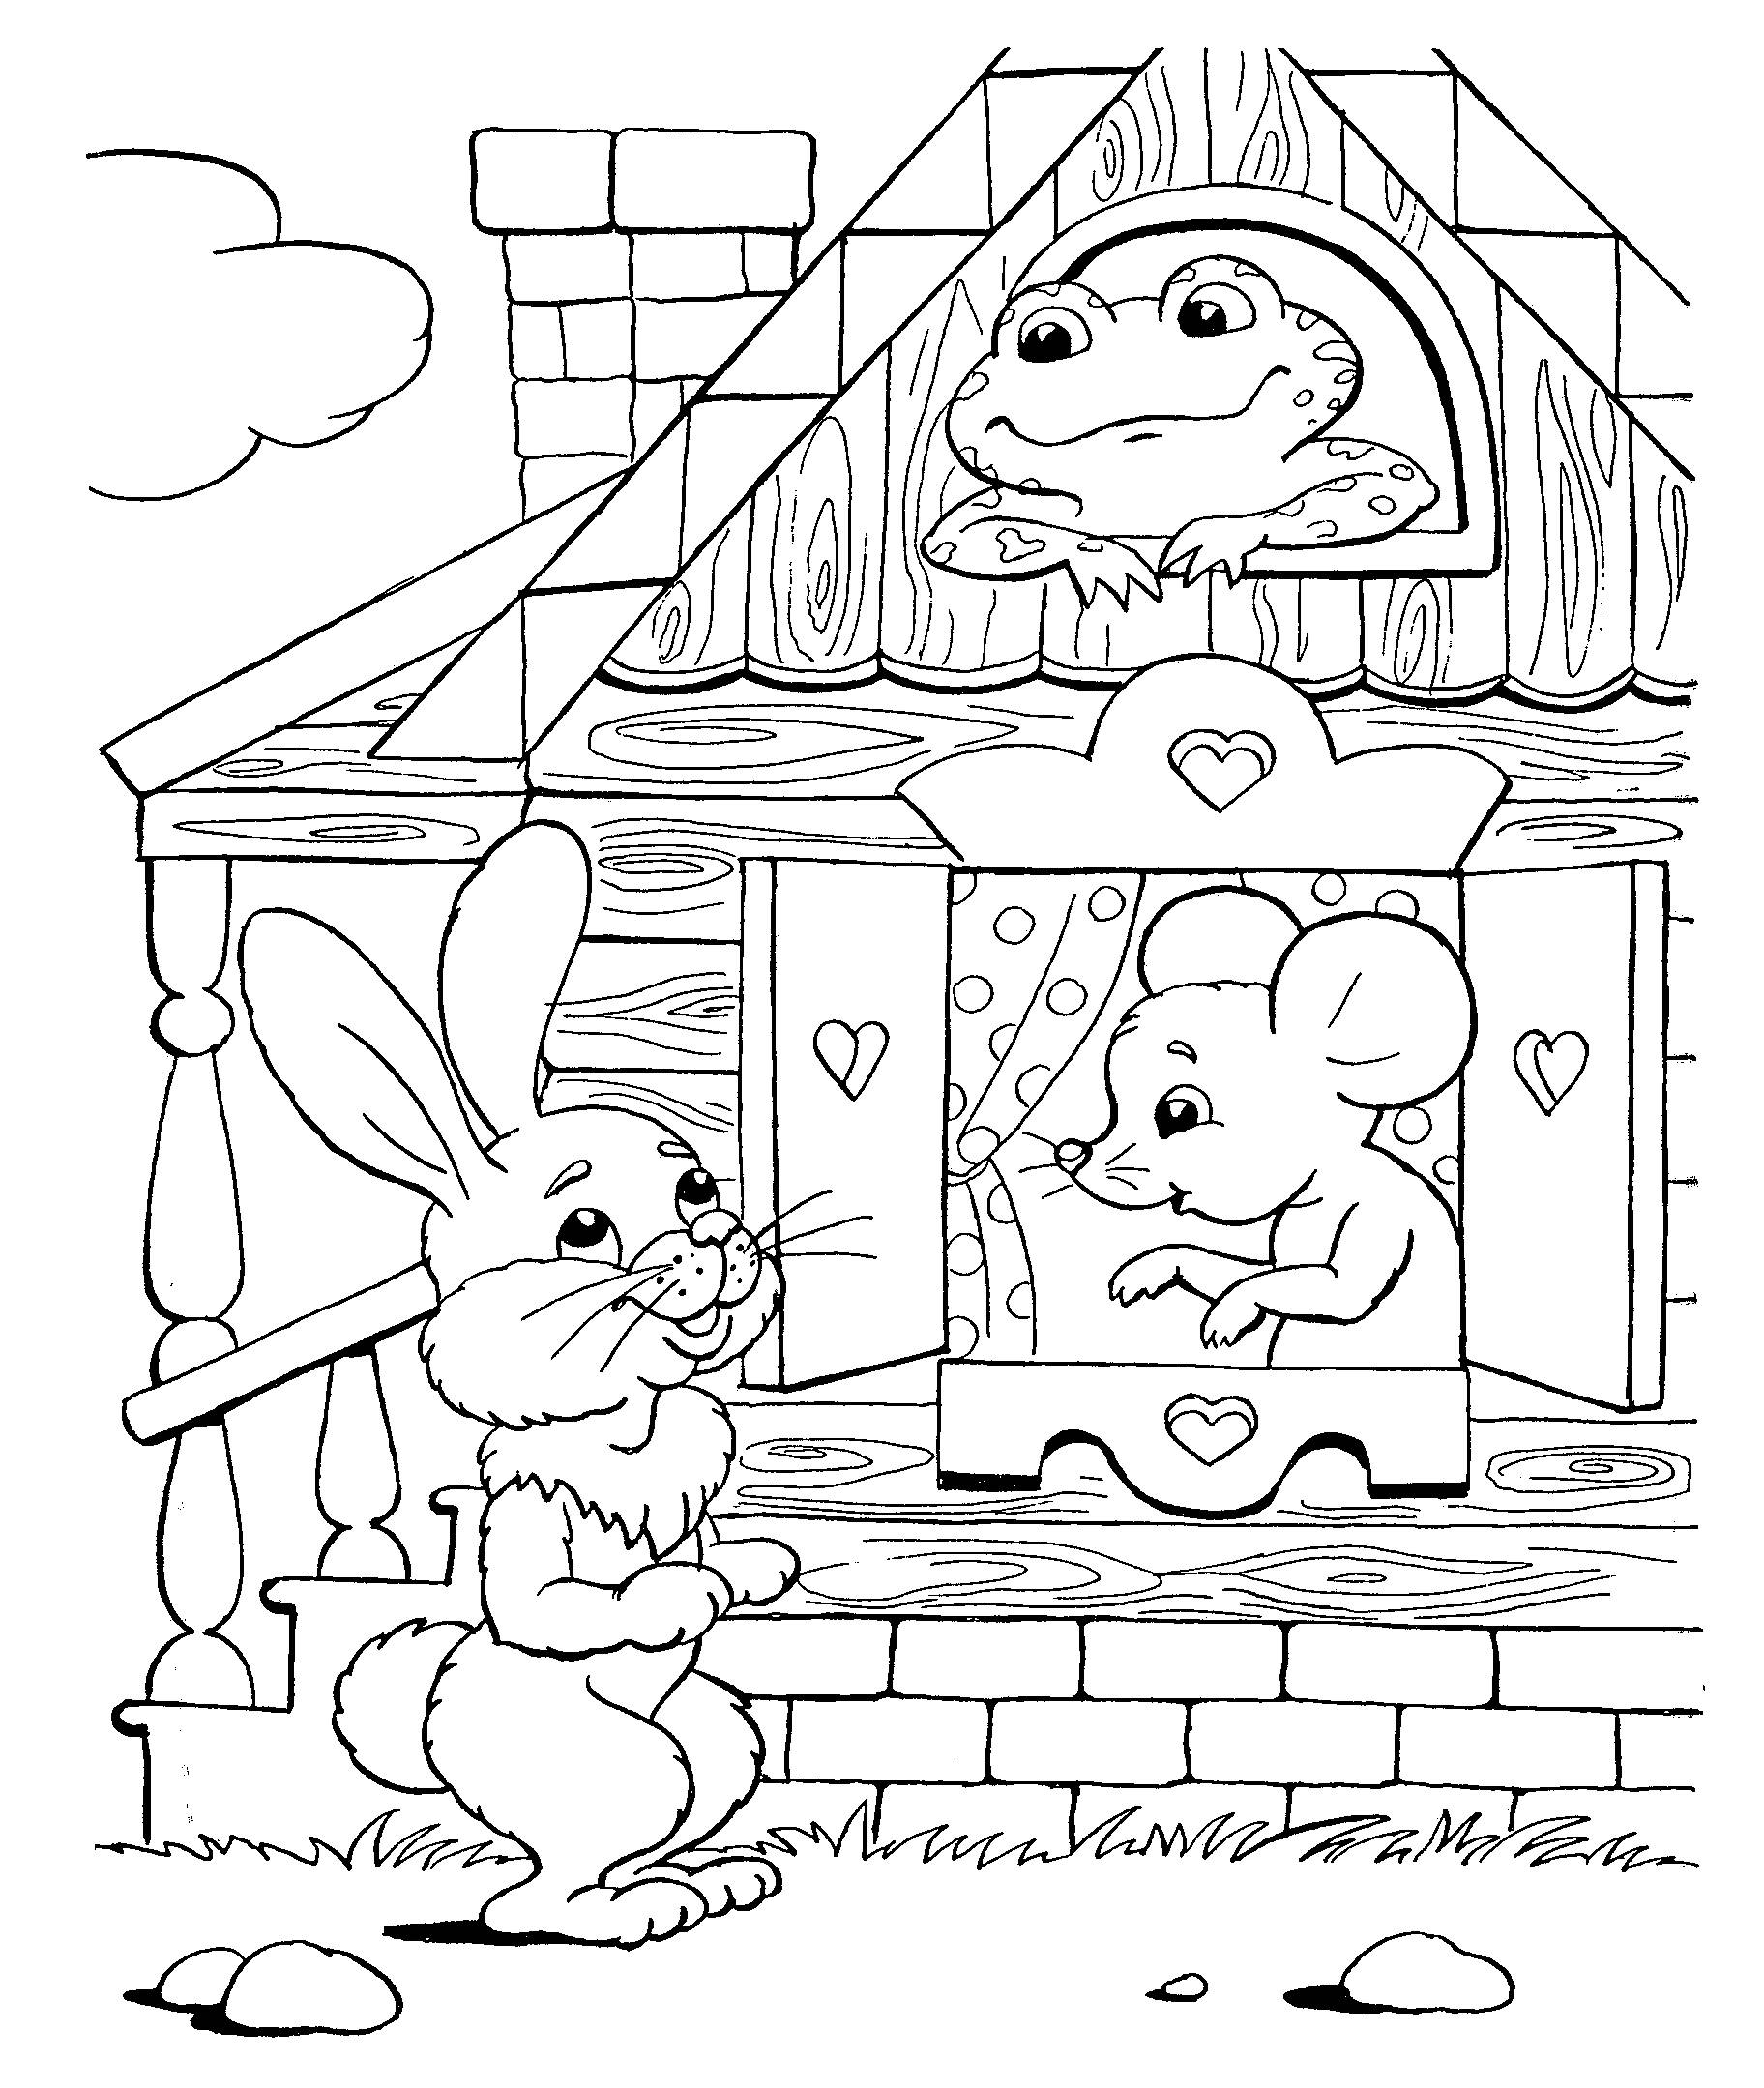 Mouse bunny and frog